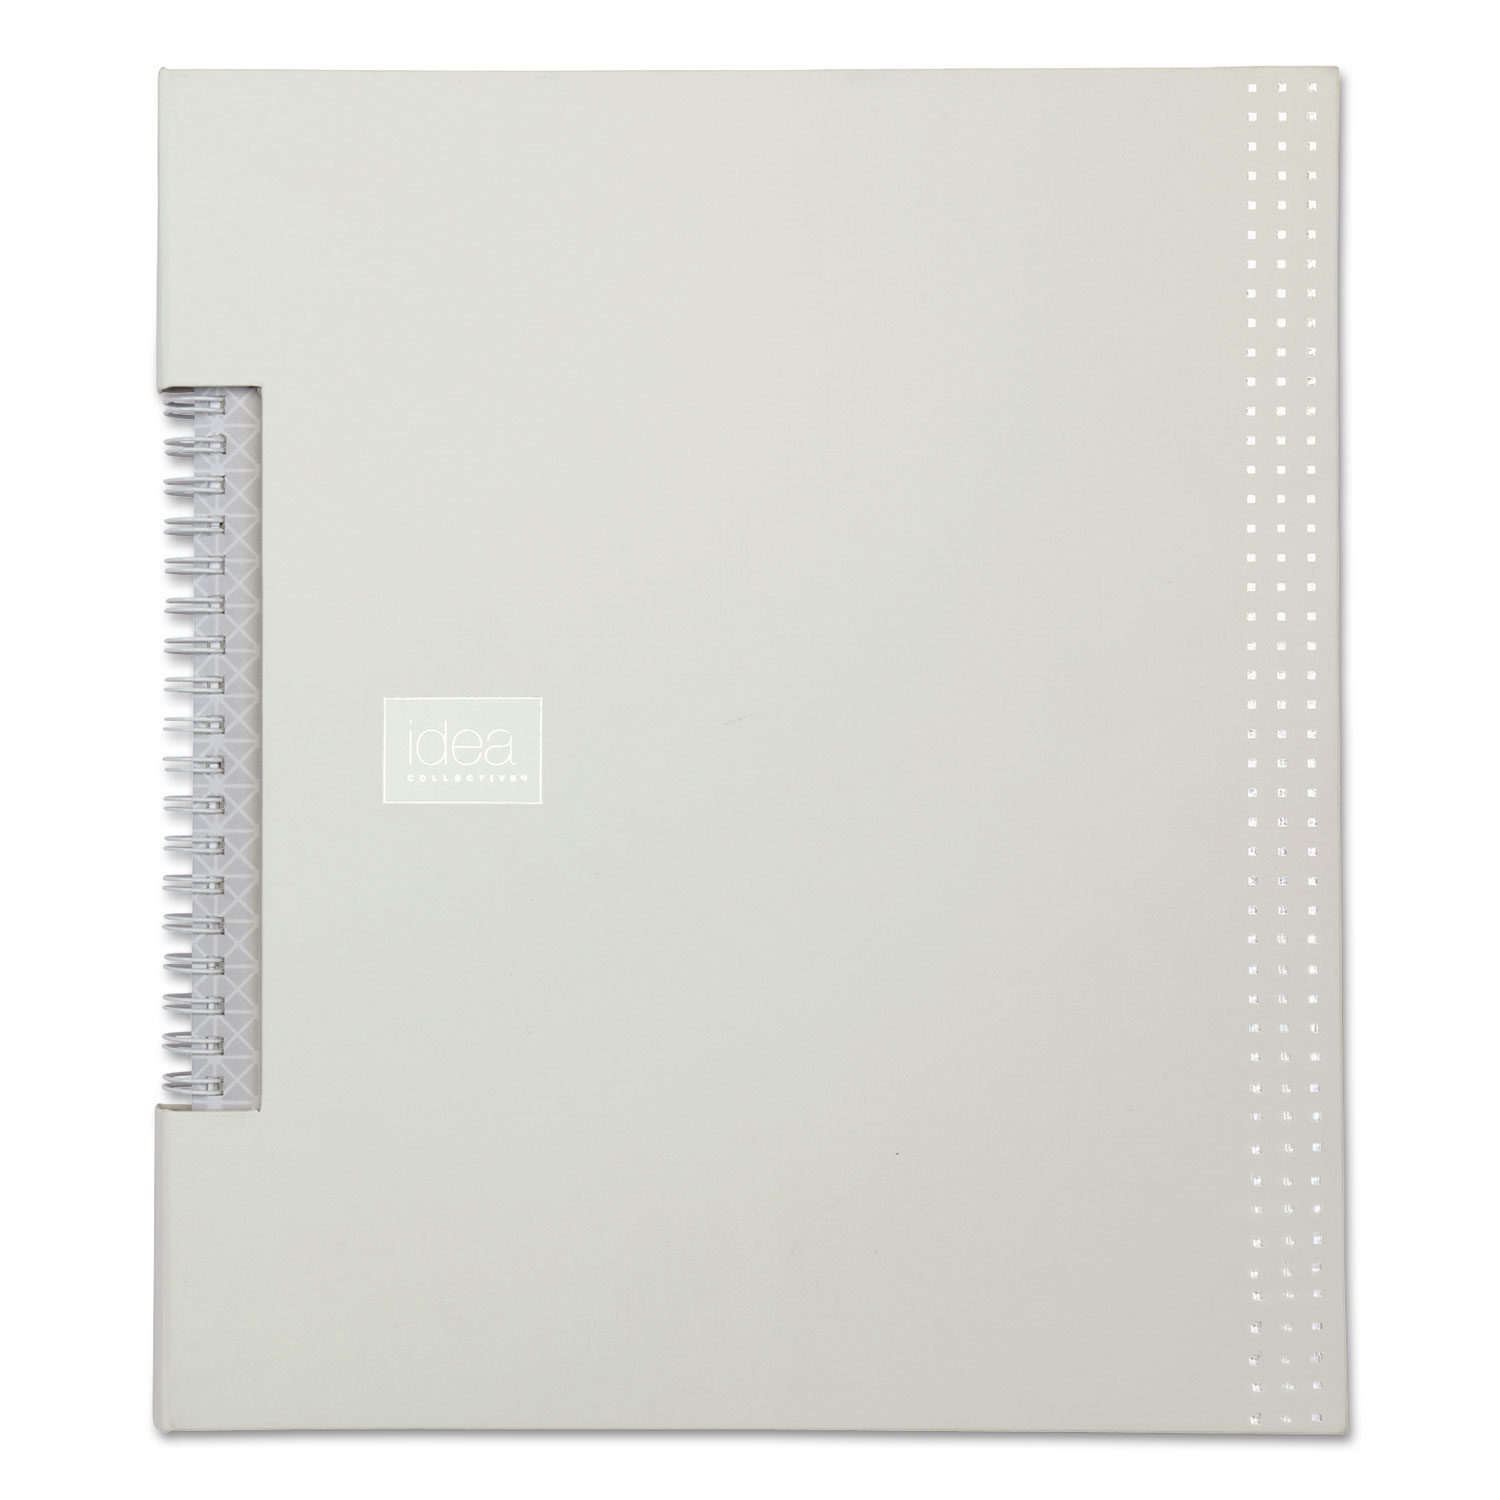 Idea Collective Professional Wirebound Notebook, White, 11 x 8.5, 80 Pages